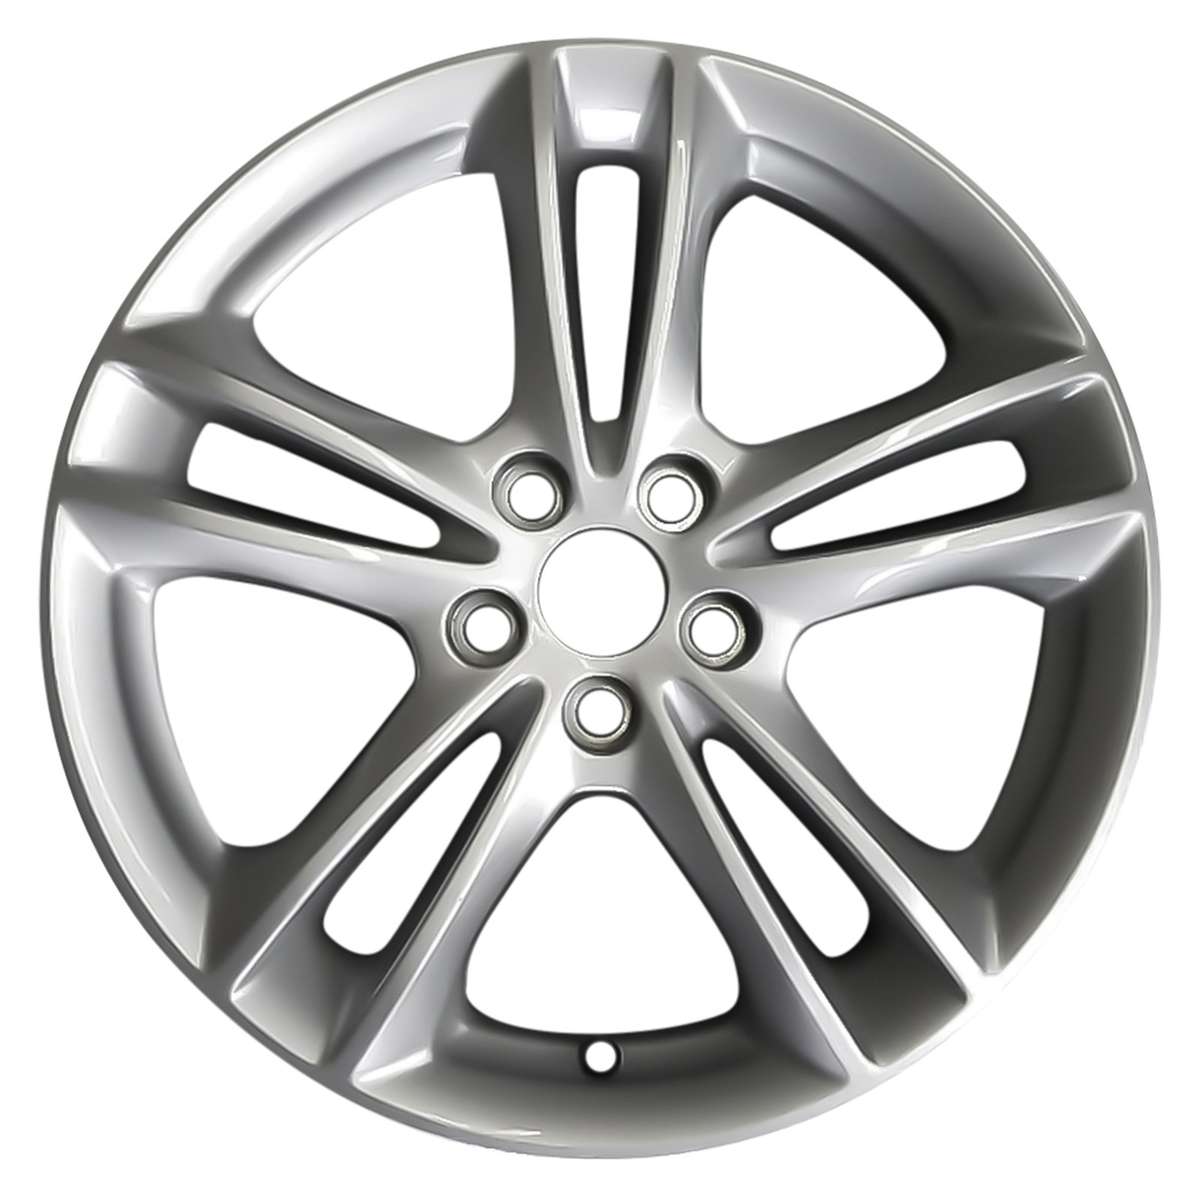 2017 Ford Fusion New 17" Replacement Wheel Rim RW3984S